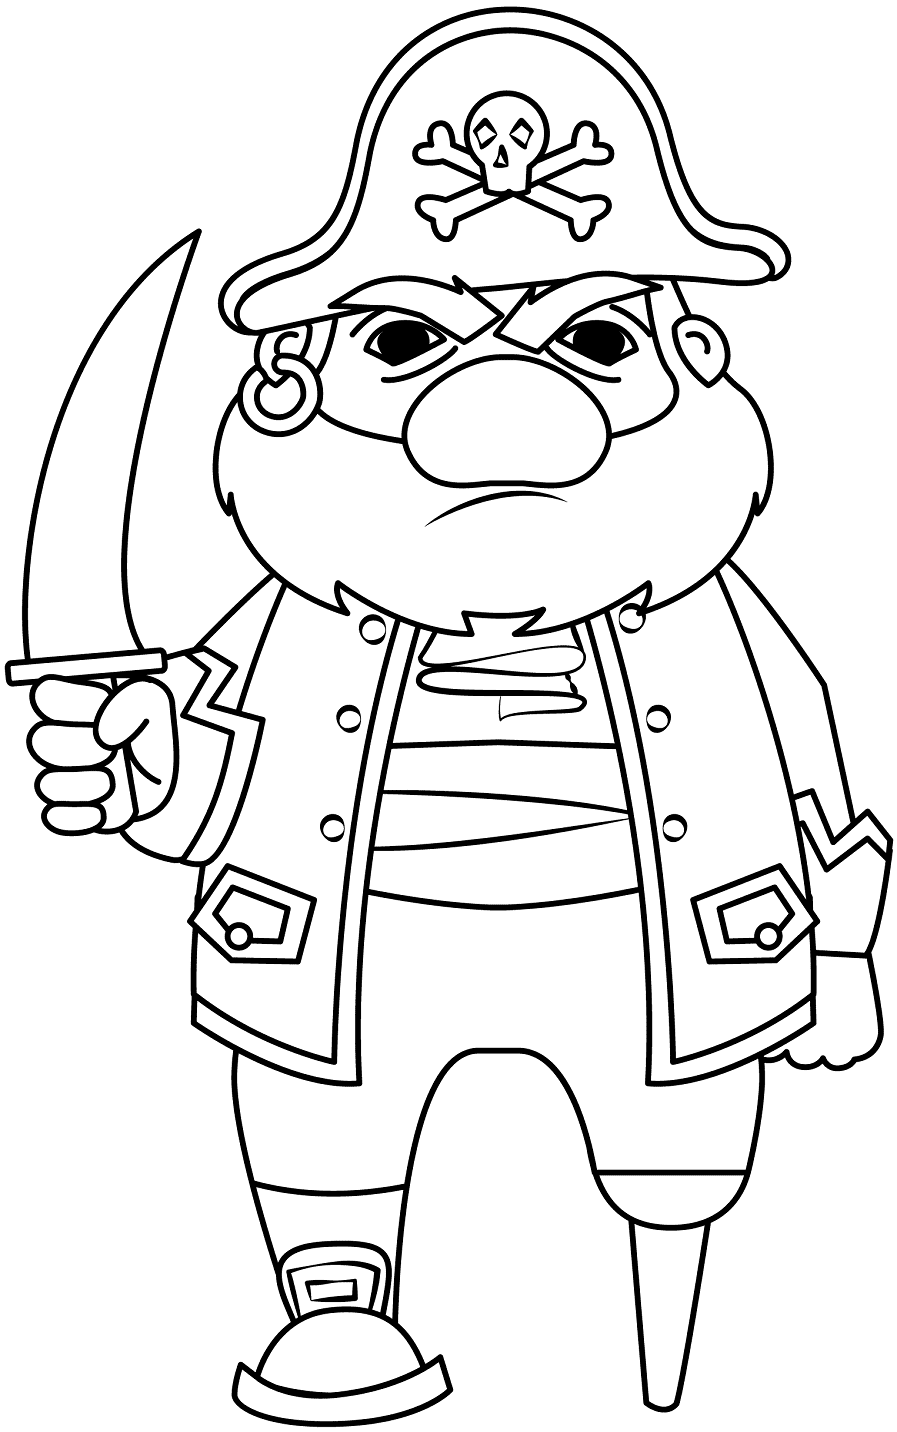 Pirate For Kids Coloring Pages